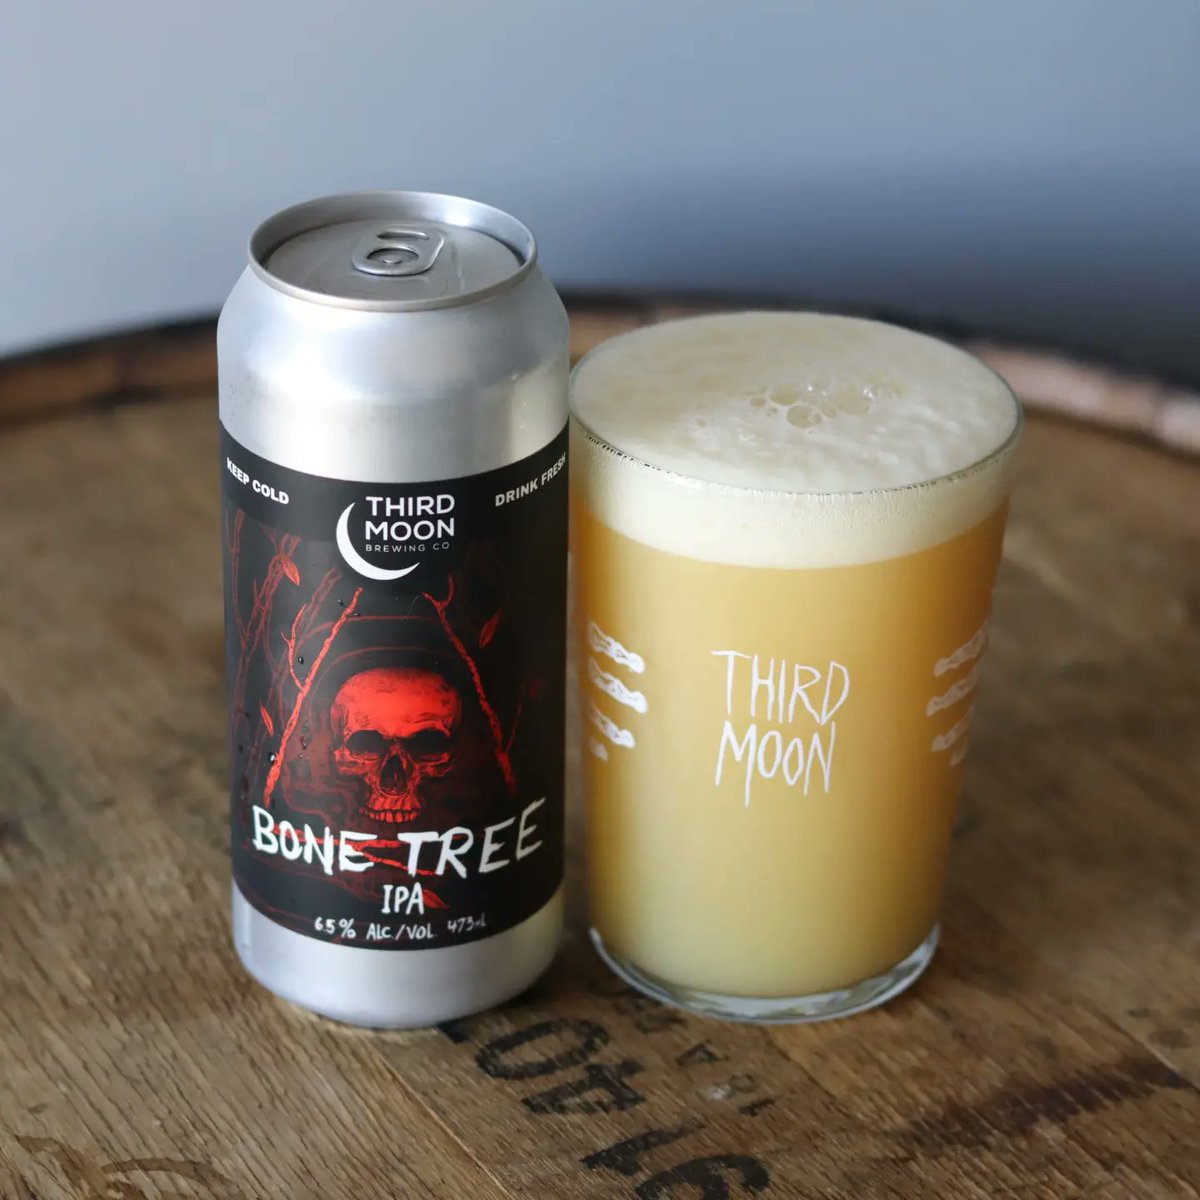 Final release this week is a fresh batch of Bone Tree! Our flagship 6.5% IPA is hopped exclusively with our hand-selected Citra for a huge blast of smooth citrus.